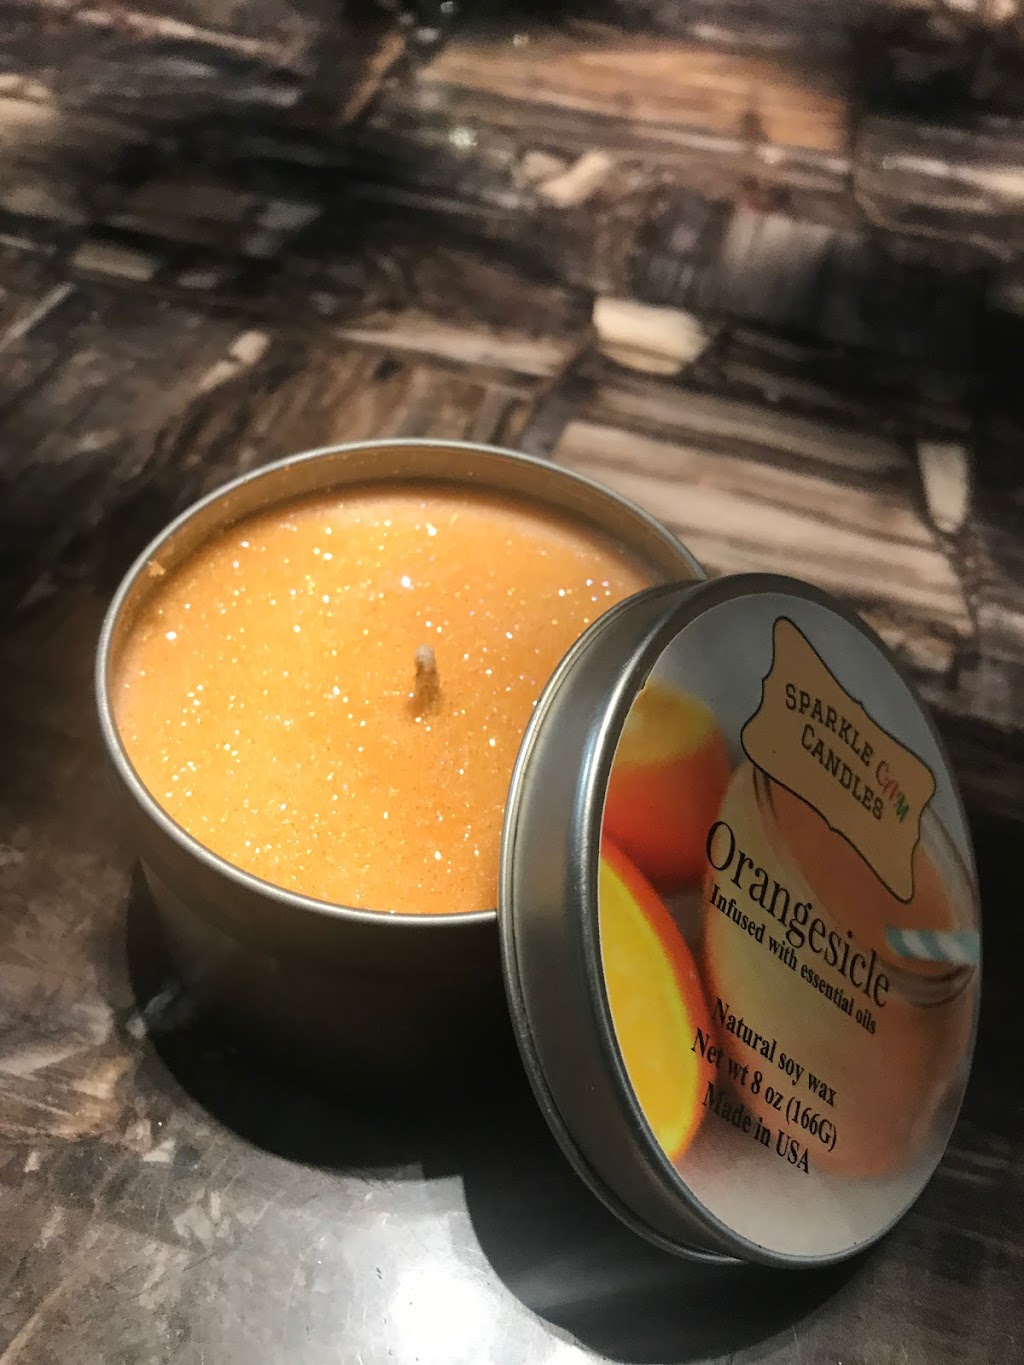 Sparkling CAM Candles | 4106 Rokeby Rd, Baltimore, MD 21229, USA | Phone: (443) 710-7057